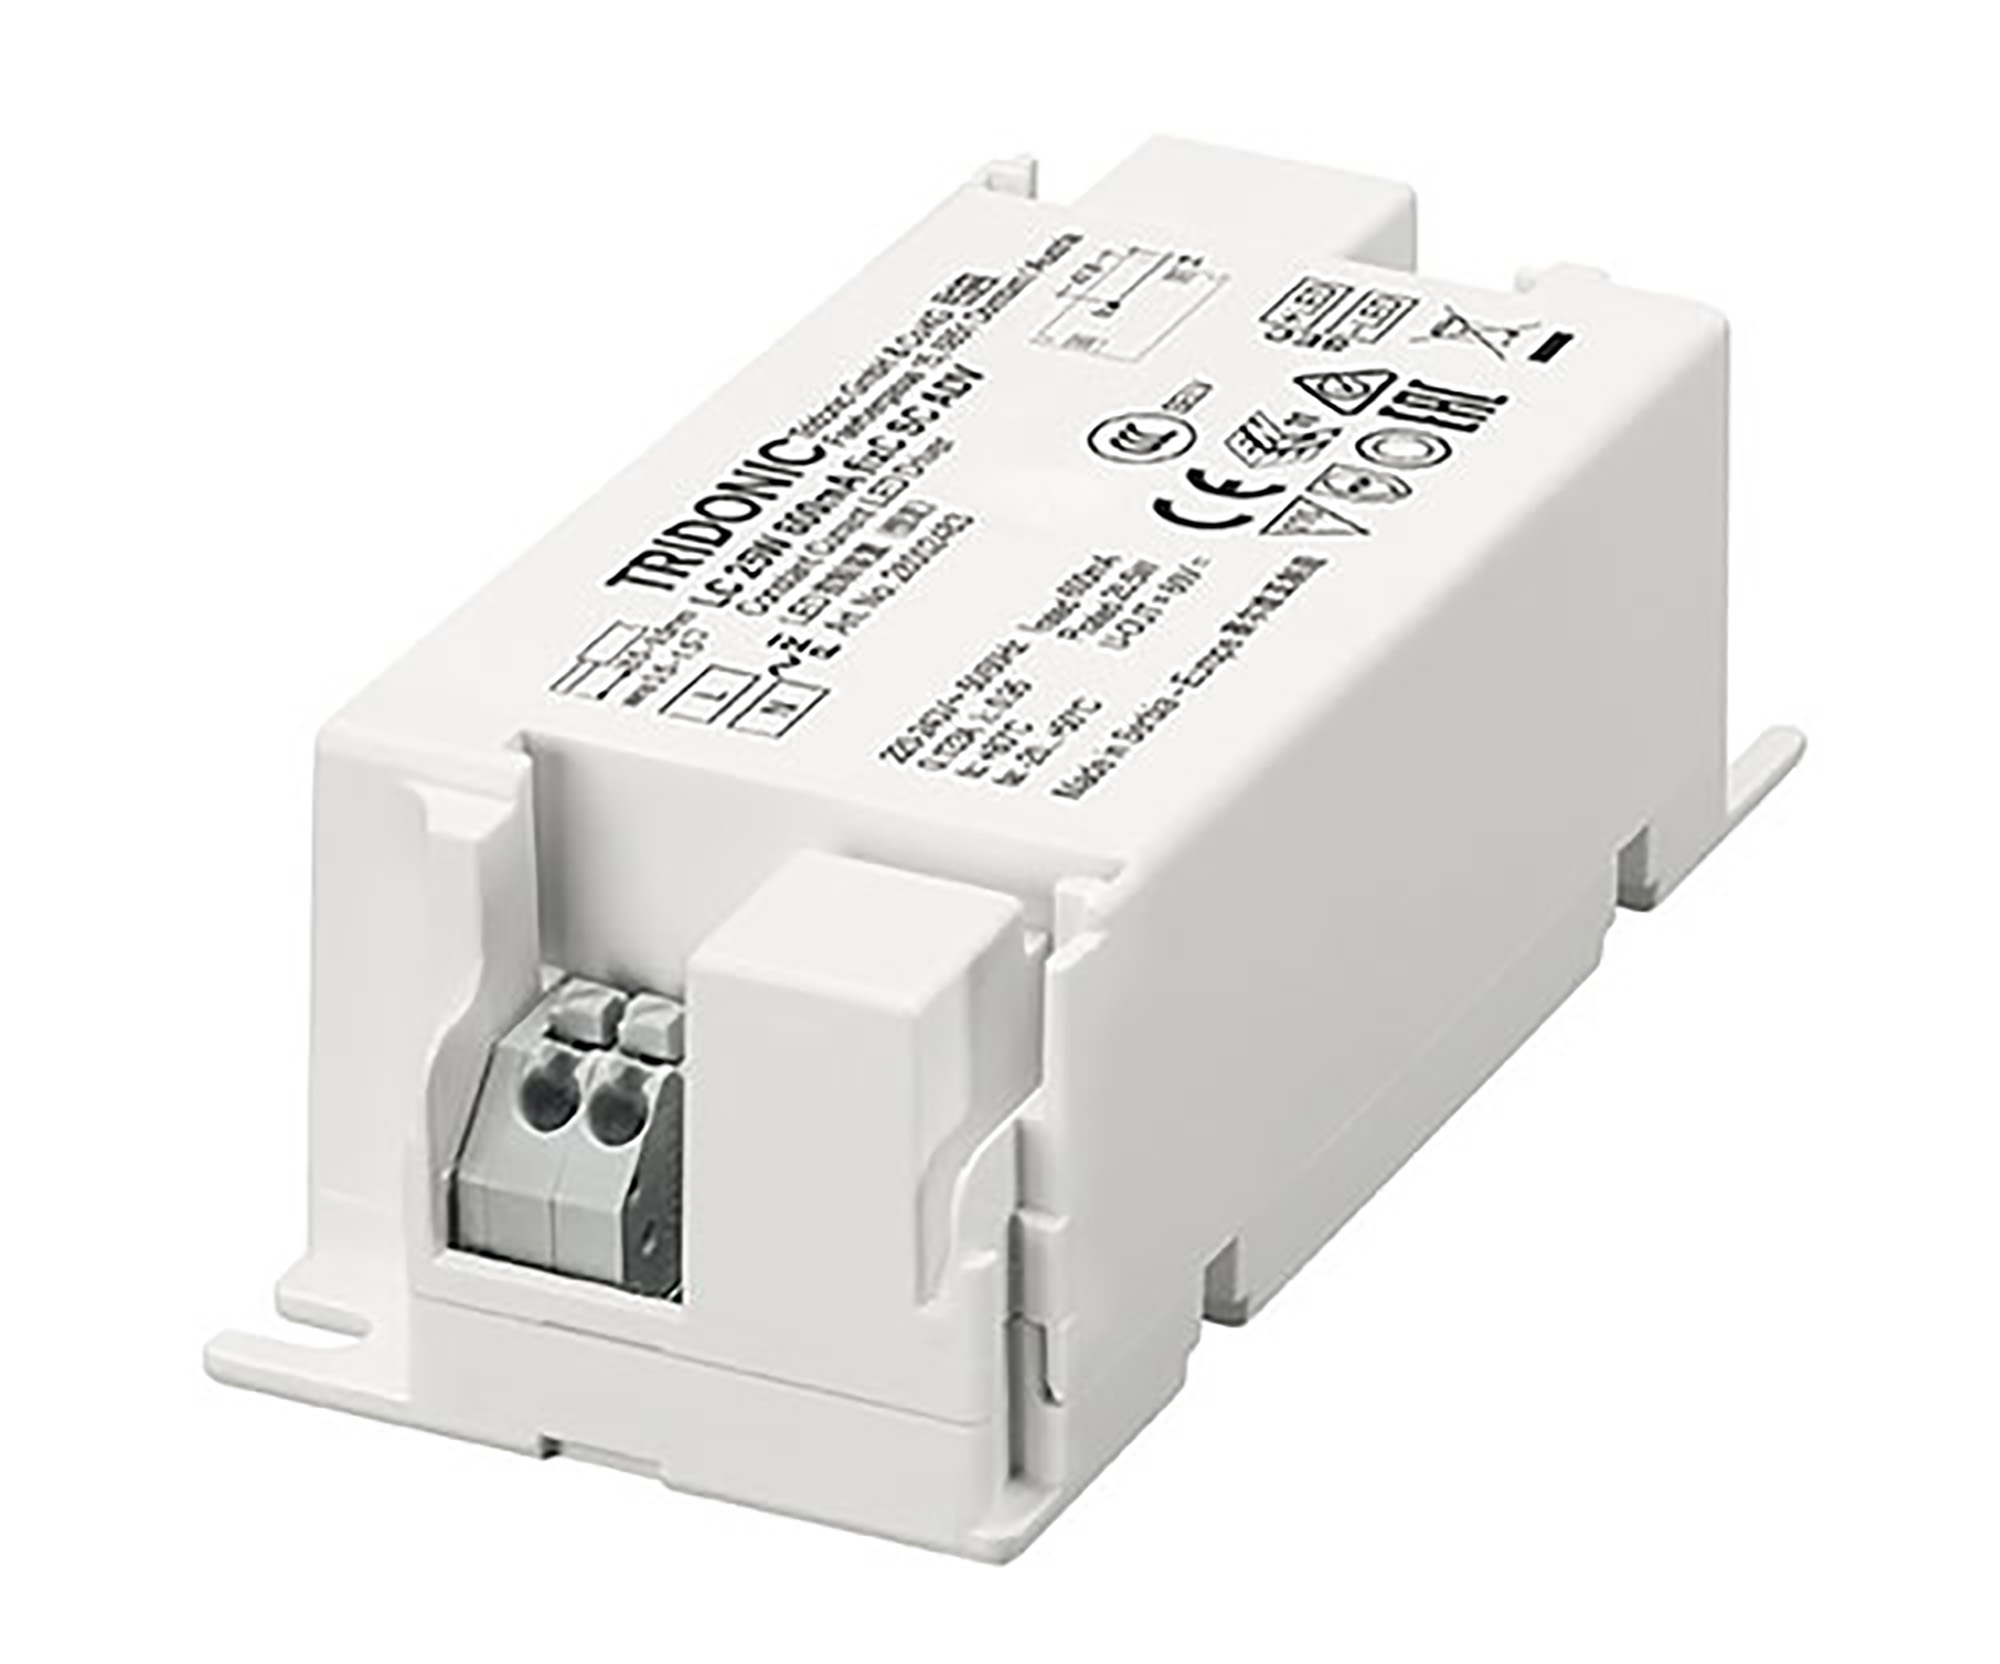 28002484  Tridonic; LC 30W 700mA fixC SC ADV; LED Converter Compact Fixed Output; Made In PRC; 5yrs Warranty